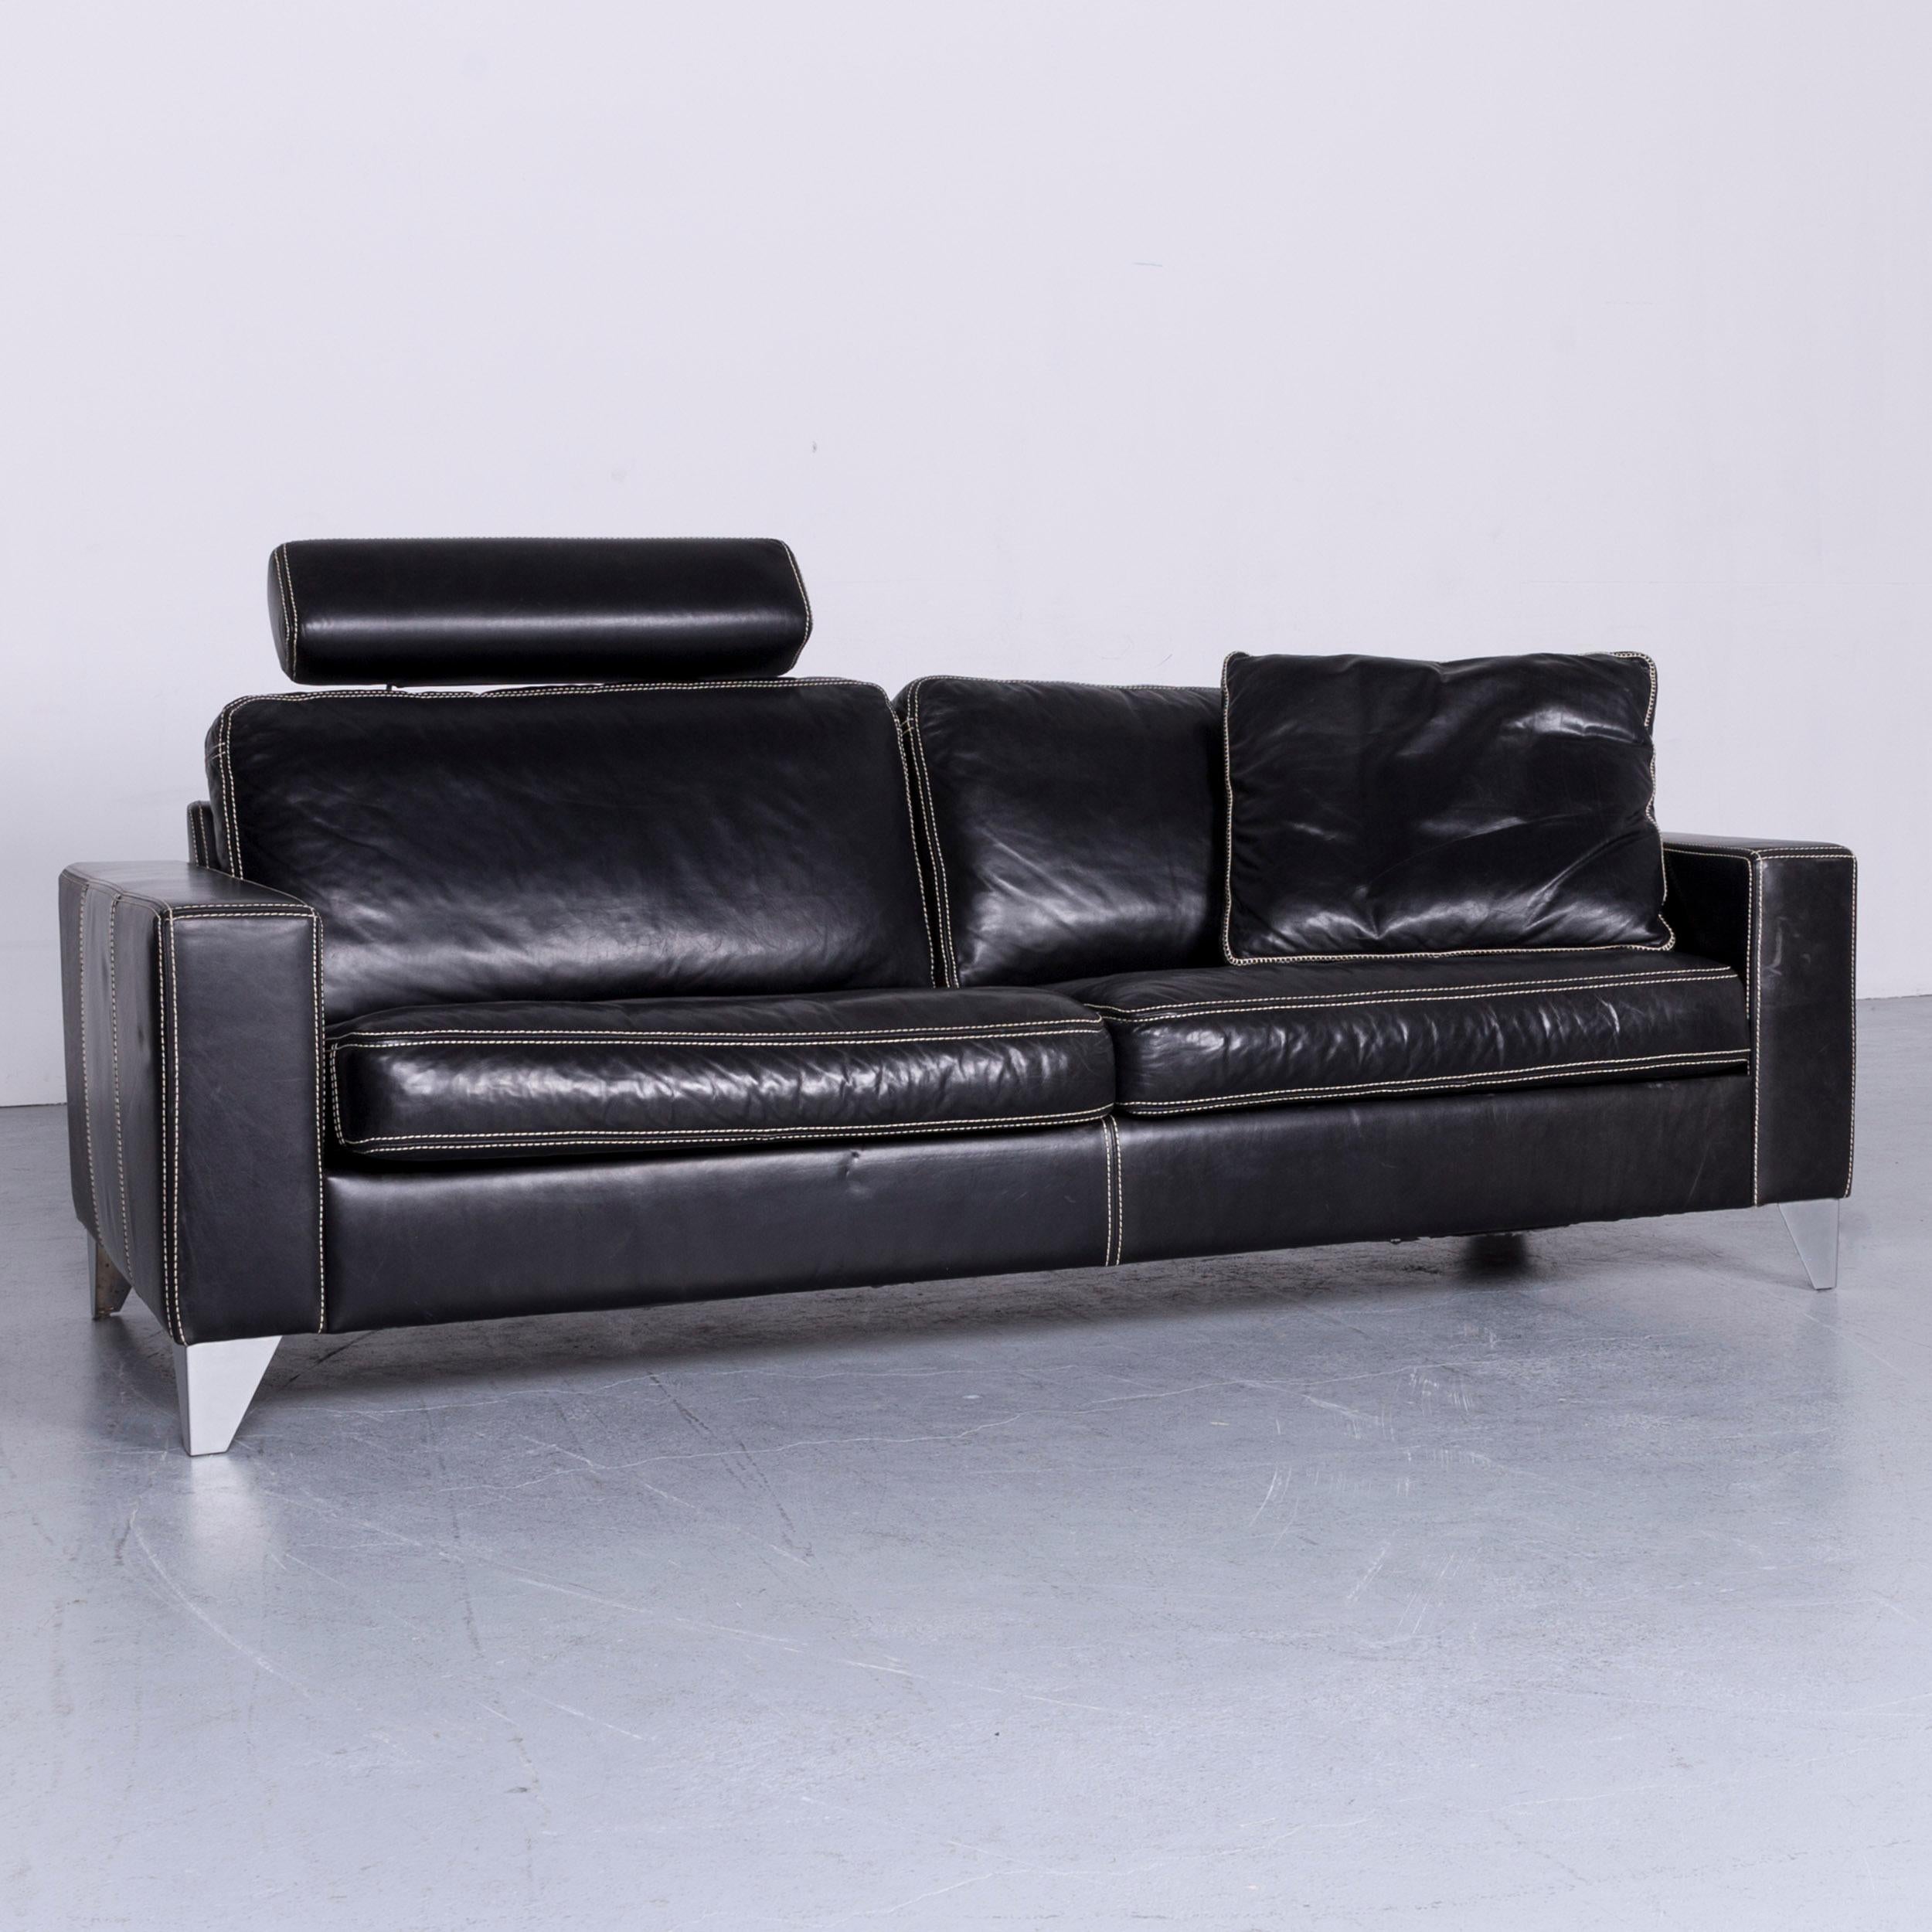 German Activineo Designer Leather Sofa Black Two-Seat Couch For Sale